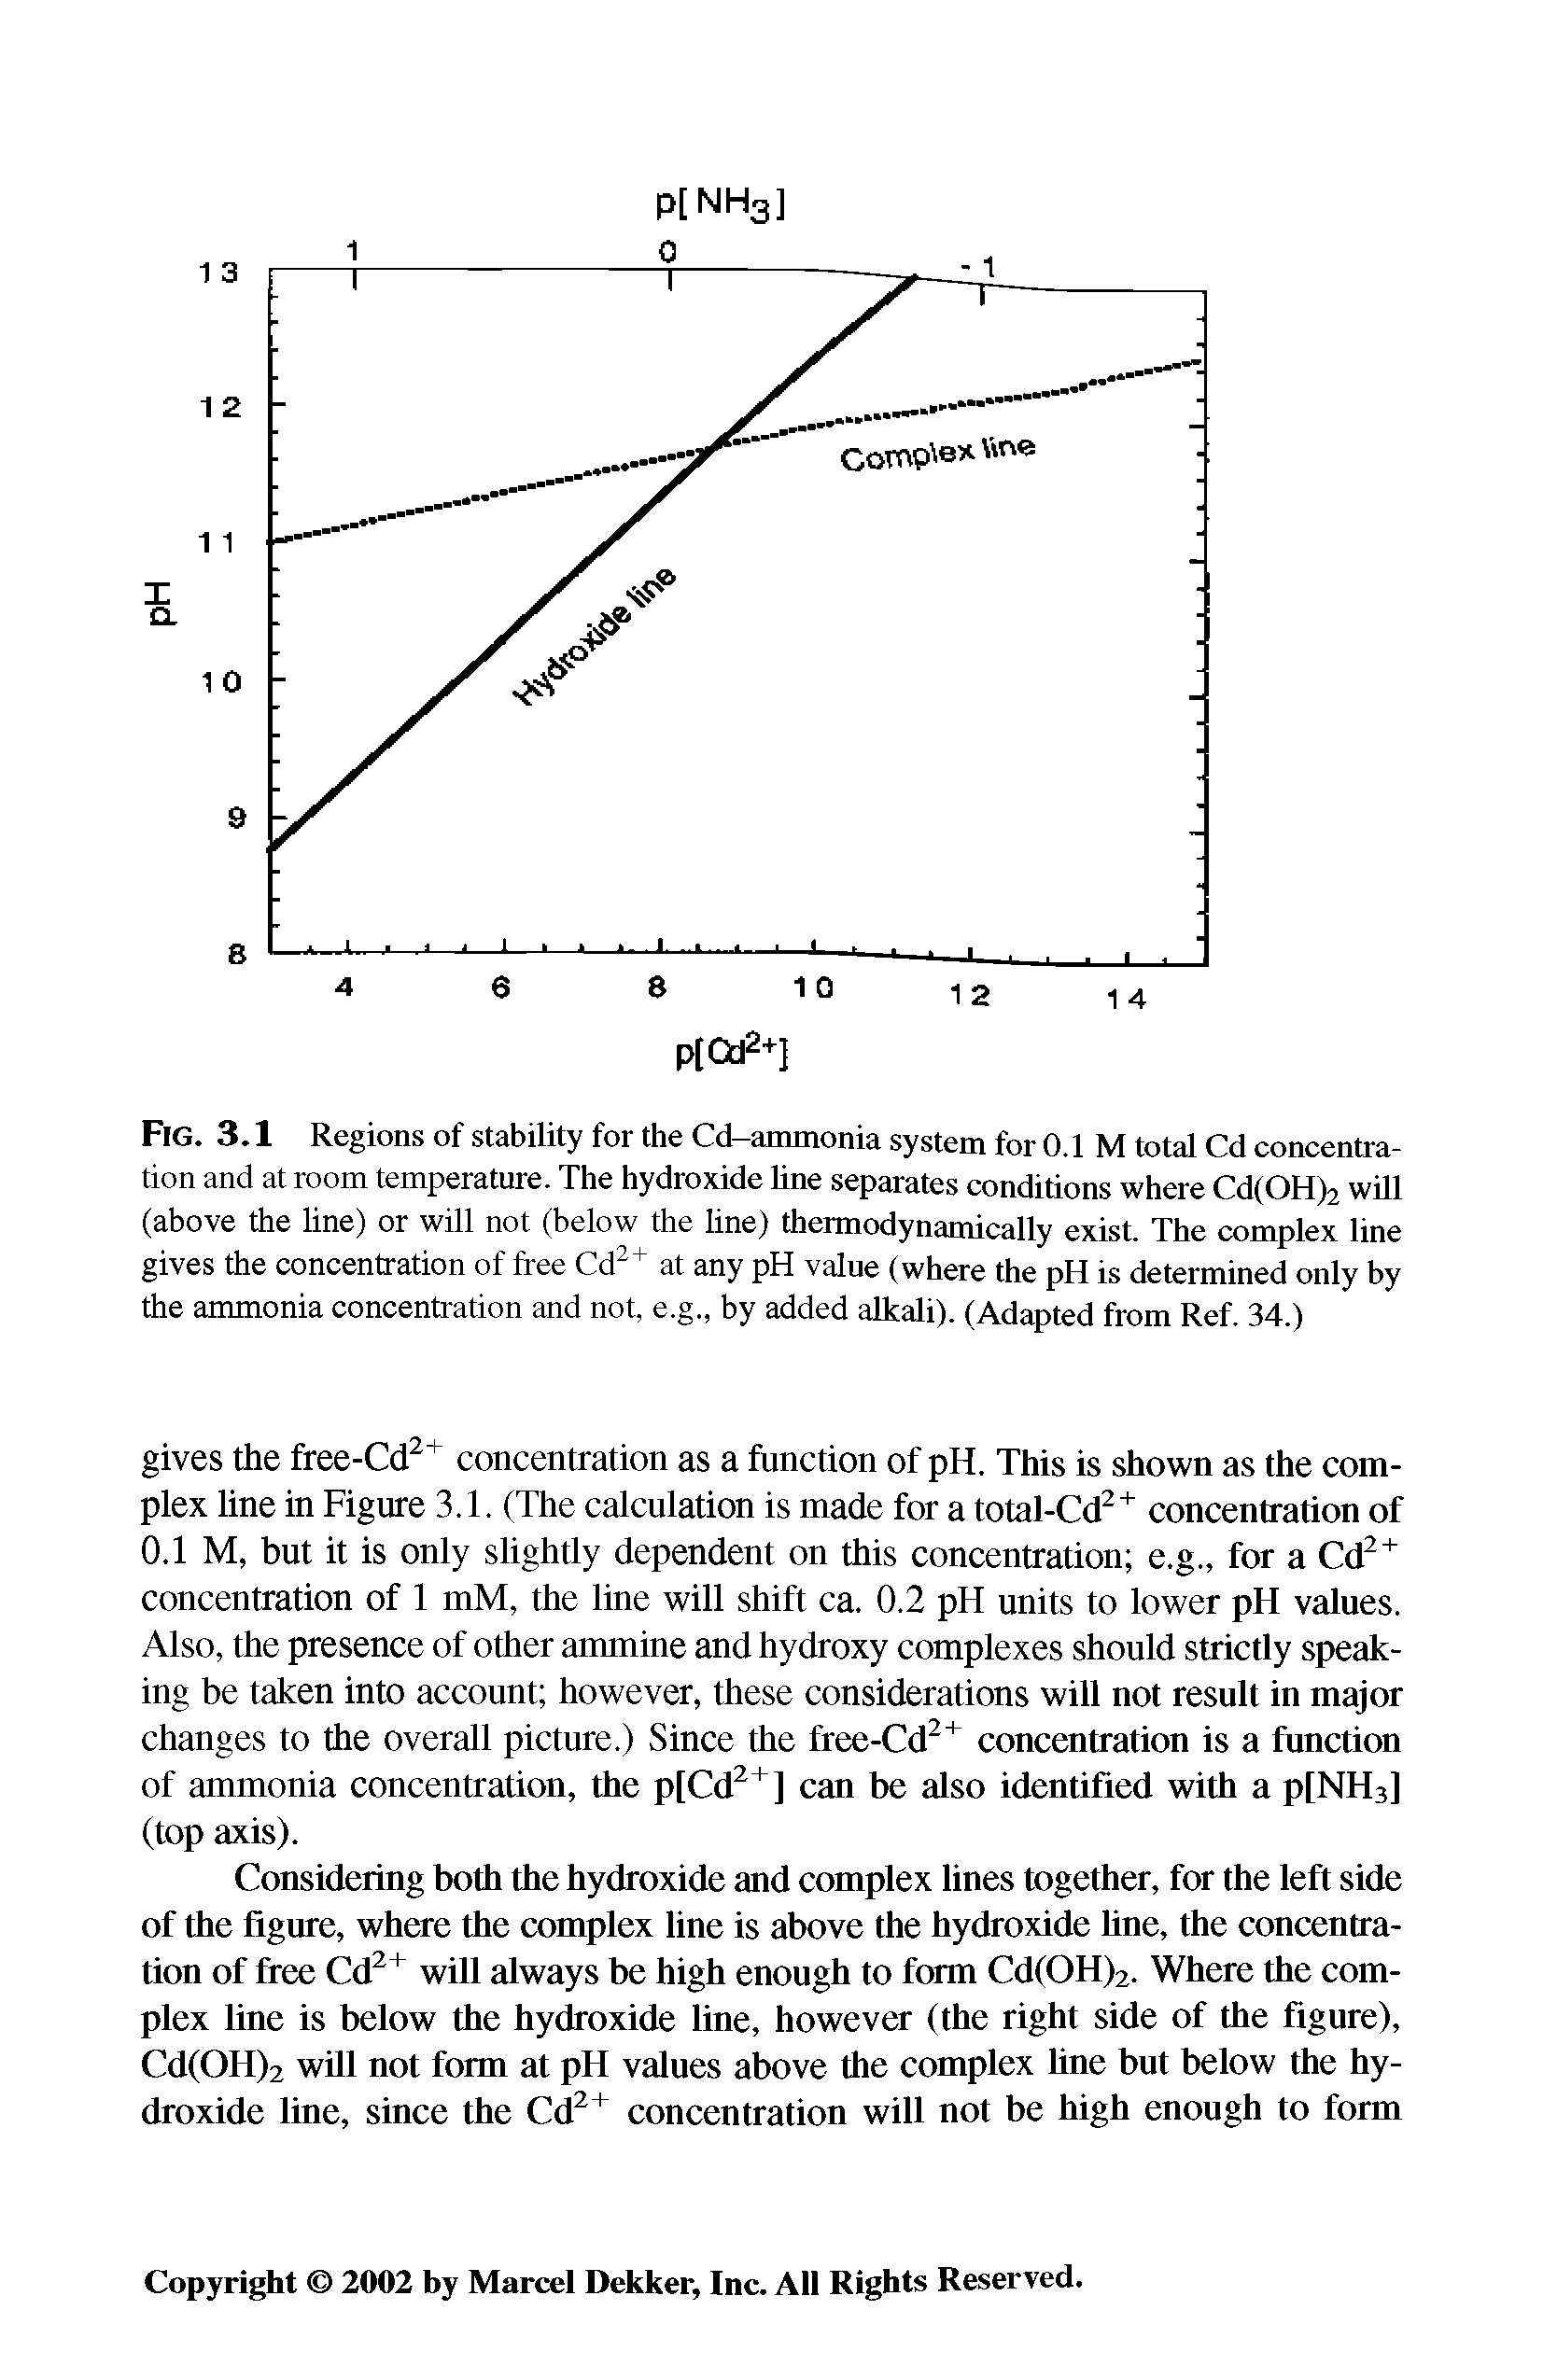 Fig. 3.1 Regions of stability for the Cd-ammonia system for 0.1 M total Cd concentration and at room temperature. The hydroxide line separates conditions where Cd(OH)2 will (above the line) or will not (below the line) thermodynamically exist. The complex line gives the concentration of free Cd + at any pH valne (where the pH is determined only by the ammonia concentration and not, e.g., by added alkali). (Adapted from Ref. 34.)...